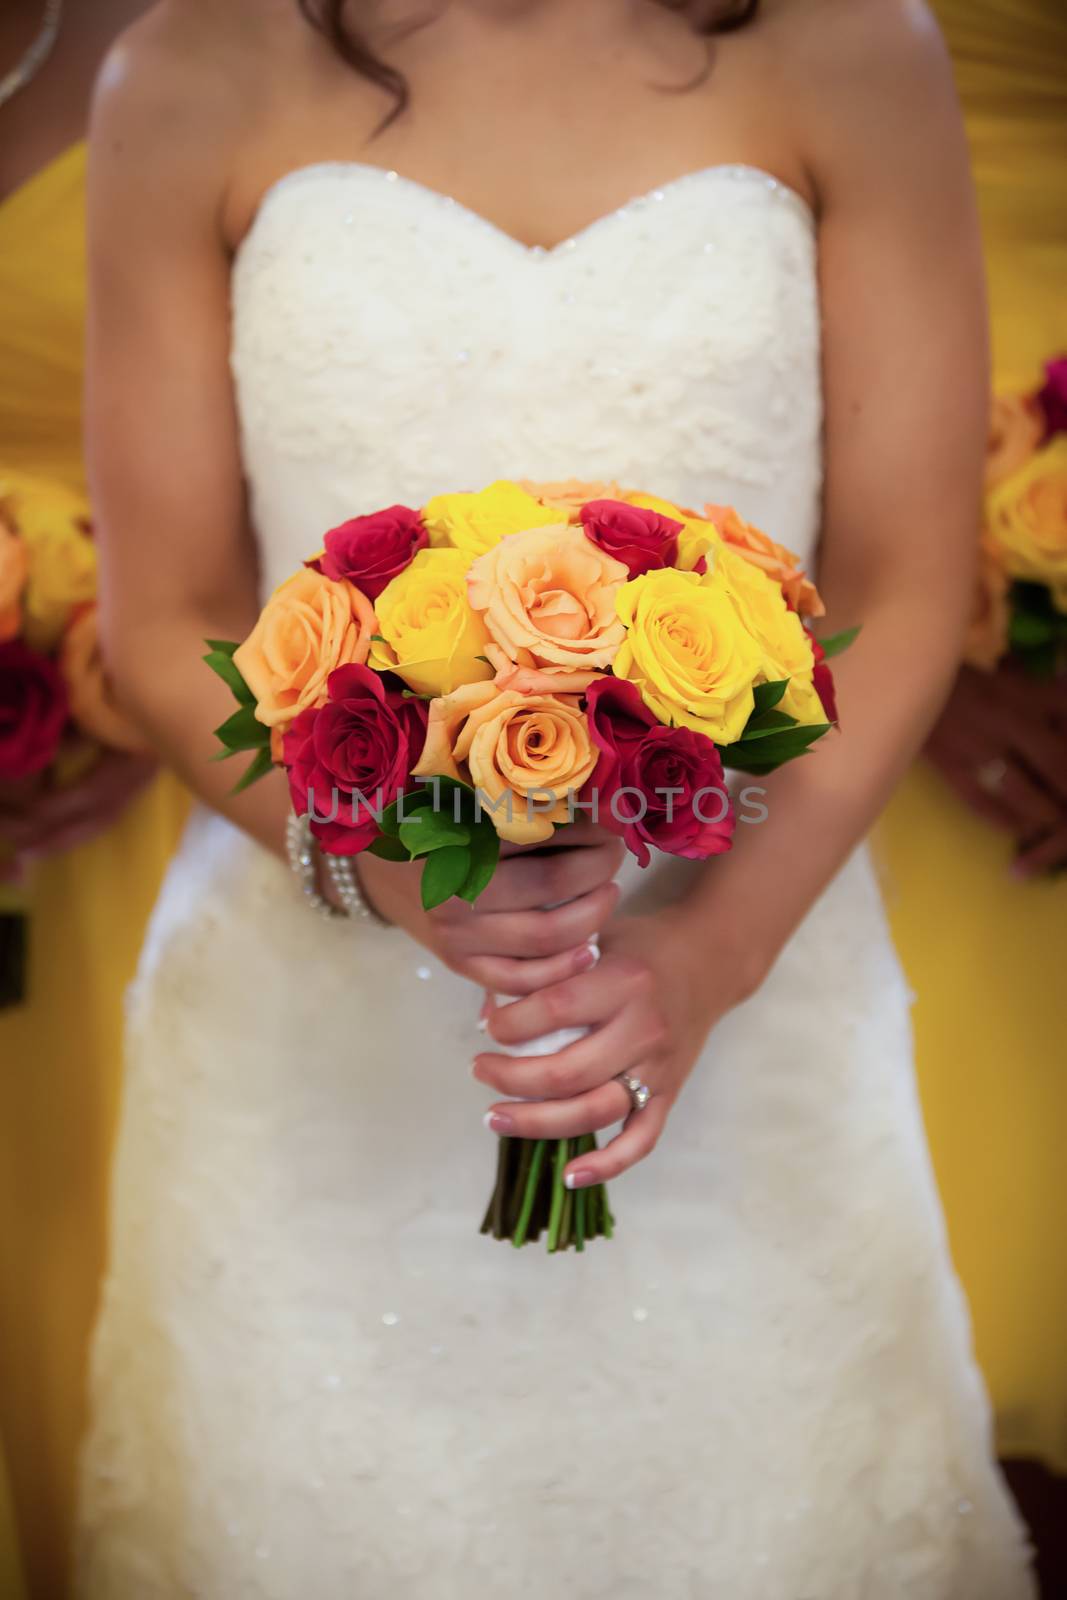 Bride Holding Bouquet with Bridesmaids in Background by salejandro